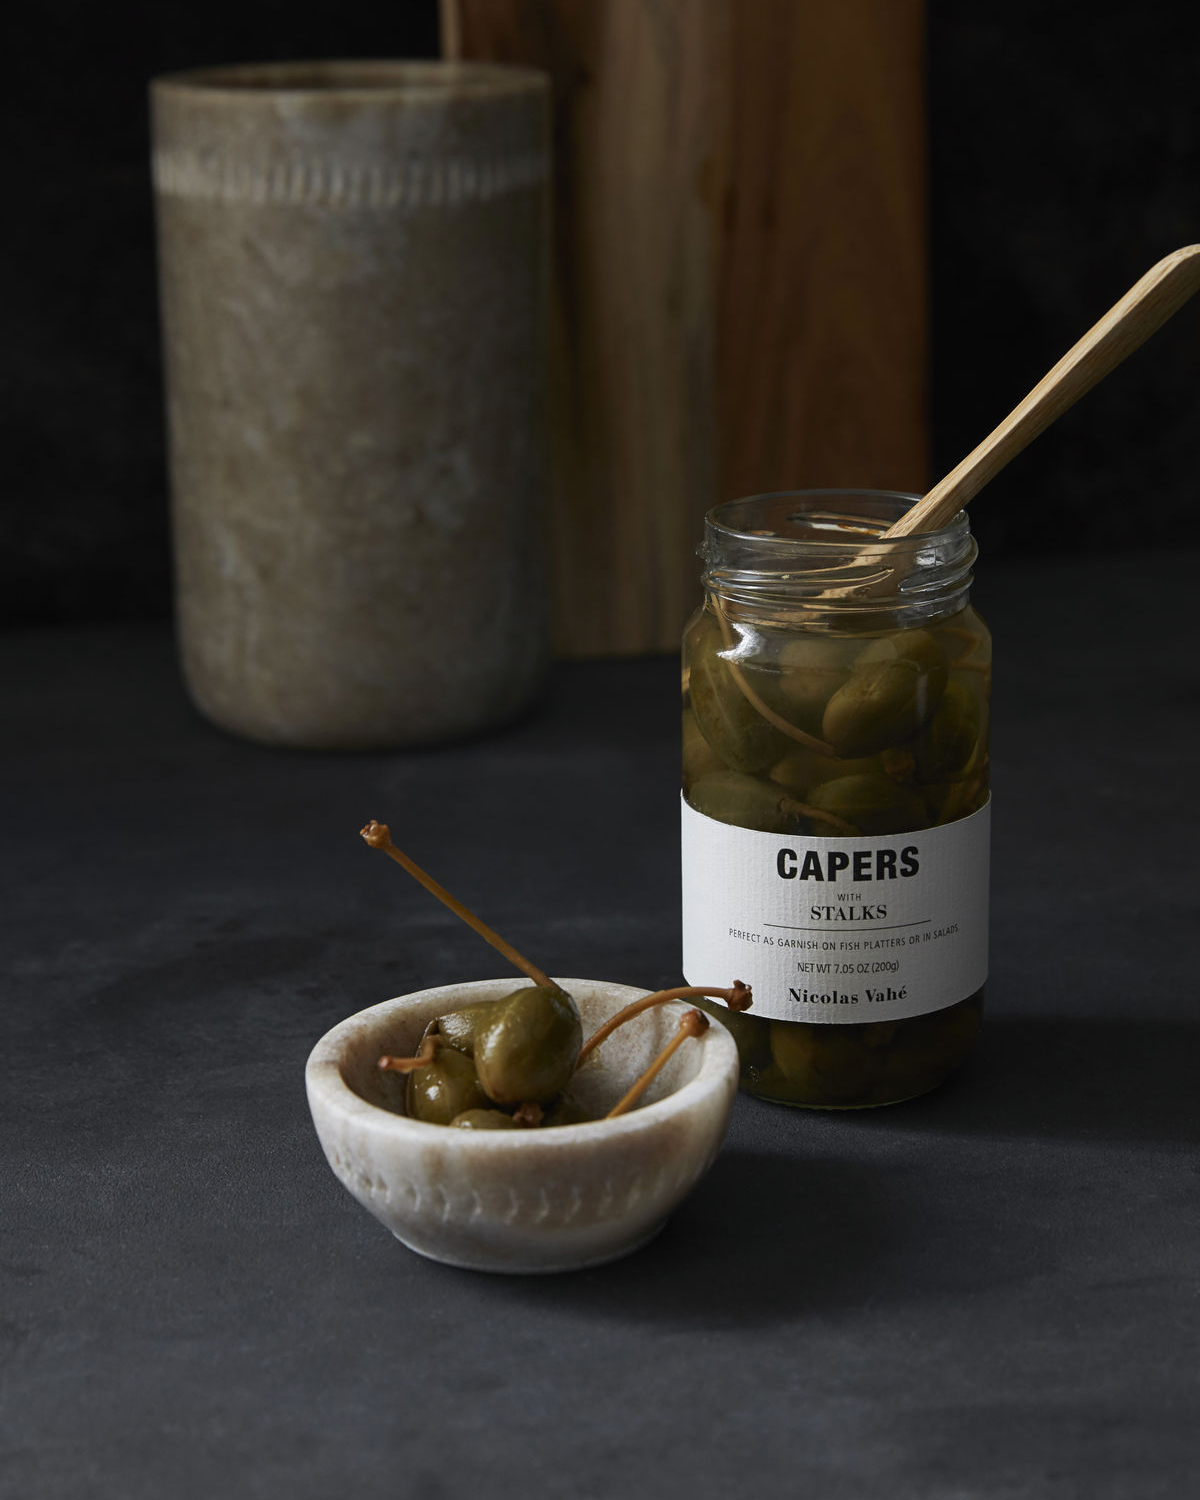 Capers, with stalks, 200 g.